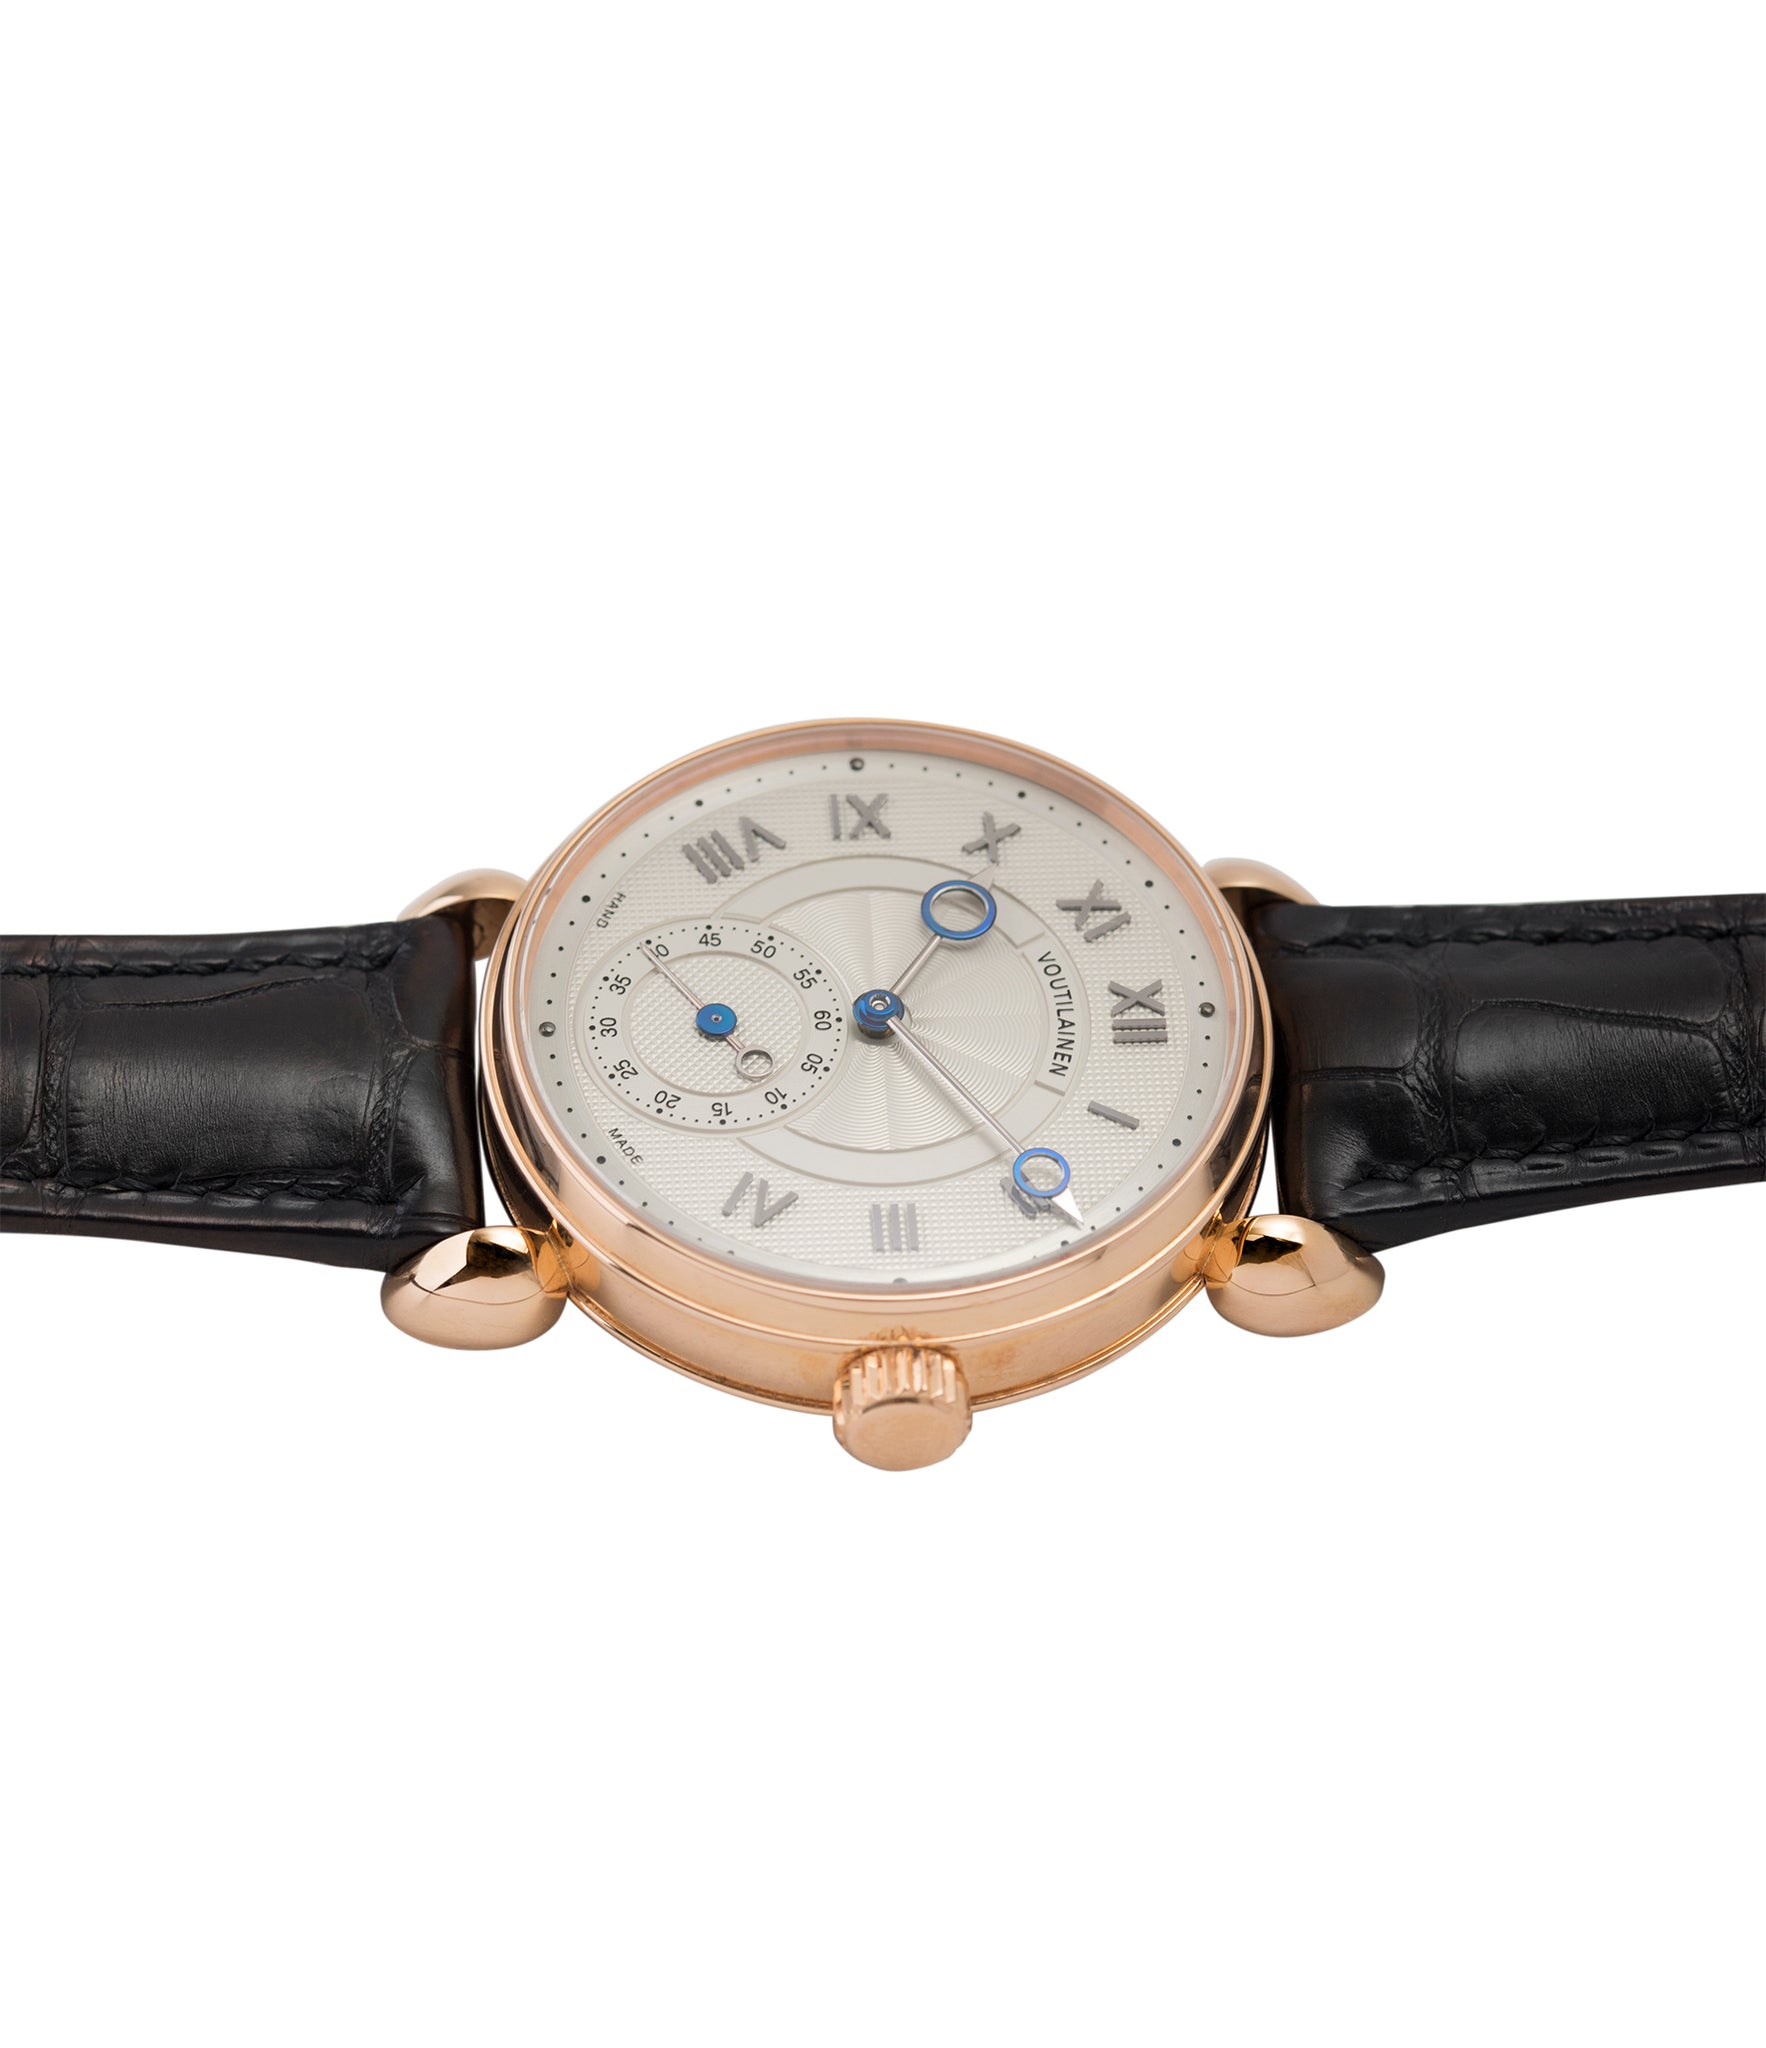 gents rare watch Voutilainen Observatoire Limited Edition rose gold rare dress watch for sale online at A Collected Man London endorsed seller of independent watchmaker